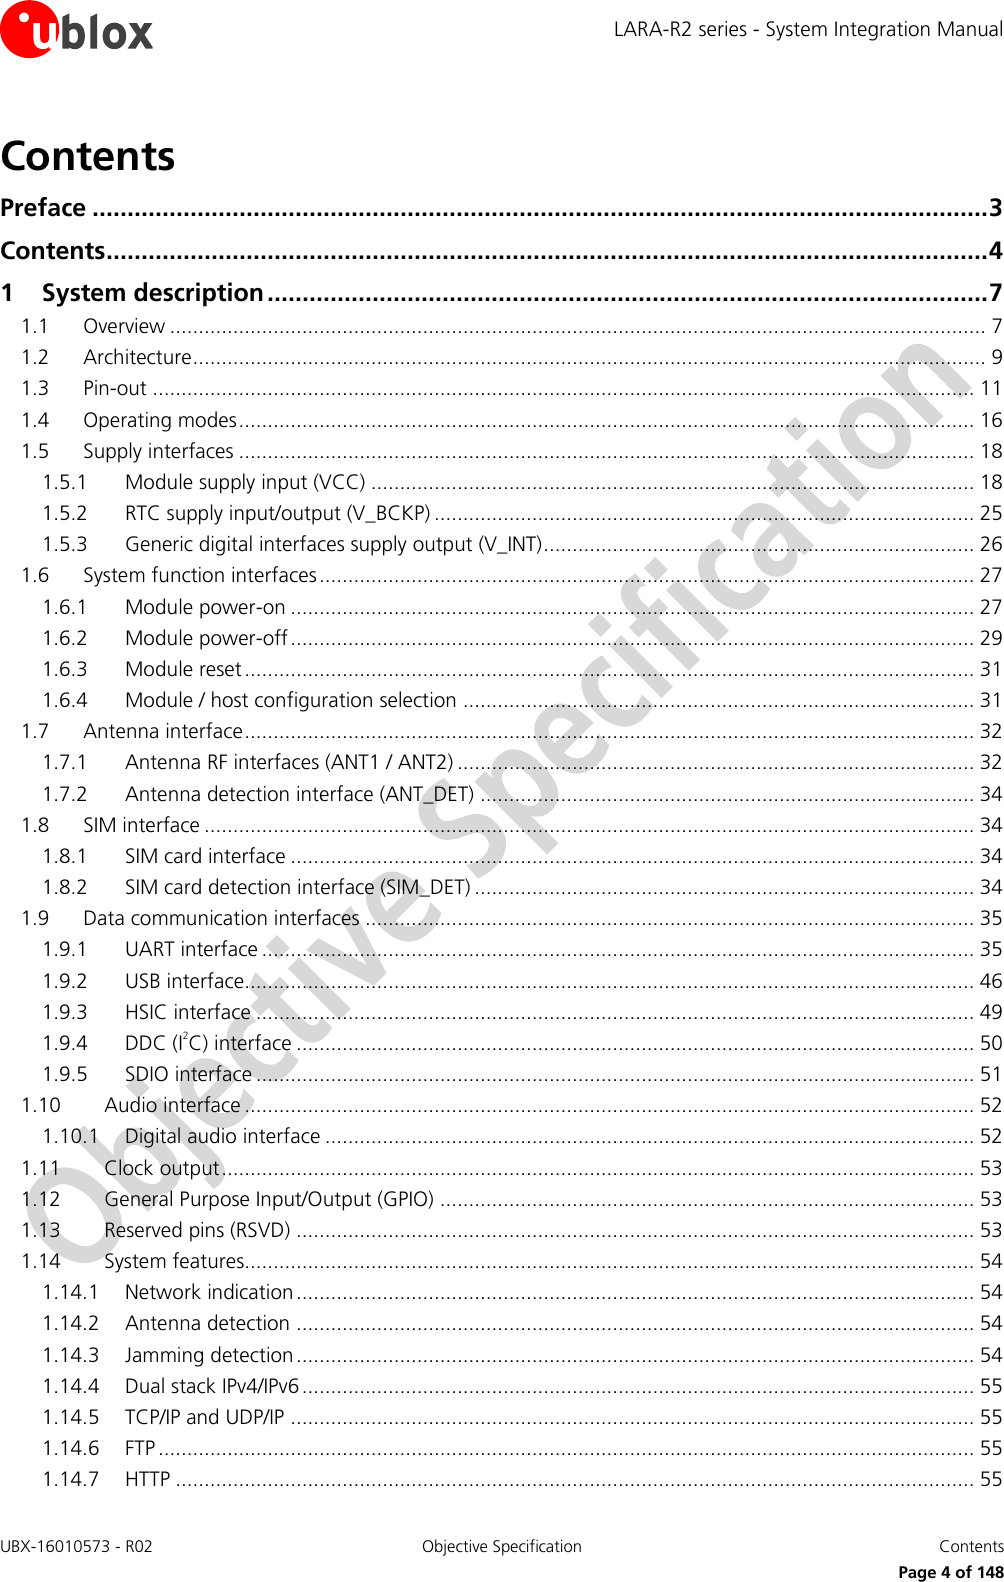 LARA-R2 series - System Integration Manual UBX-16010573 - R02  Objective Specification  Contents     Page 4 of 148 Contents Preface ................................................................................................................................ 3 Contents .............................................................................................................................. 4 1 System description ....................................................................................................... 7 1.1 Overview .............................................................................................................................................. 7 1.2 Architecture .......................................................................................................................................... 9 1.3 Pin-out ............................................................................................................................................... 11 1.4 Operating modes ................................................................................................................................ 16 1.5 Supply interfaces ................................................................................................................................ 18 1.5.1 Module supply input (VCC) ......................................................................................................... 18 1.5.2 RTC supply input/output (V_BCKP) .............................................................................................. 25 1.5.3 Generic digital interfaces supply output (V_INT) ........................................................................... 26 1.6 System function interfaces .................................................................................................................. 27 1.6.1 Module power-on ....................................................................................................................... 27 1.6.2 Module power-off ....................................................................................................................... 29 1.6.3 Module reset ............................................................................................................................... 31 1.6.4 Module / host configuration selection ......................................................................................... 31 1.7 Antenna interface ............................................................................................................................... 32 1.7.1 Antenna RF interfaces (ANT1 / ANT2) .......................................................................................... 32 1.7.2 Antenna detection interface (ANT_DET) ...................................................................................... 34 1.8 SIM interface ...................................................................................................................................... 34 1.8.1 SIM card interface ....................................................................................................................... 34 1.8.2 SIM card detection interface (SIM_DET) ....................................................................................... 34 1.9 Data communication interfaces .......................................................................................................... 35 1.9.1 UART interface ............................................................................................................................ 35 1.9.2 USB interface............................................................................................................................... 46 1.9.3 HSIC interface ............................................................................................................................. 49 1.9.4 DDC (I2C) interface ...................................................................................................................... 50 1.9.5 SDIO interface ............................................................................................................................. 51 1.10 Audio interface ............................................................................................................................... 52 1.10.1 Digital audio interface ................................................................................................................. 52 1.11 Clock output ................................................................................................................................... 53 1.12 General Purpose Input/Output (GPIO) ............................................................................................. 53 1.13 Reserved pins (RSVD) ...................................................................................................................... 53 1.14 System features............................................................................................................................... 54 1.14.1 Network indication ...................................................................................................................... 54 1.14.2 Antenna detection ...................................................................................................................... 54 1.14.3 Jamming detection ...................................................................................................................... 54 1.14.4 Dual stack IPv4/IPv6 ..................................................................................................................... 55 1.14.5 TCP/IP and UDP/IP ....................................................................................................................... 55 1.14.6 FTP .............................................................................................................................................. 55 1.14.7 HTTP ........................................................................................................................................... 55 